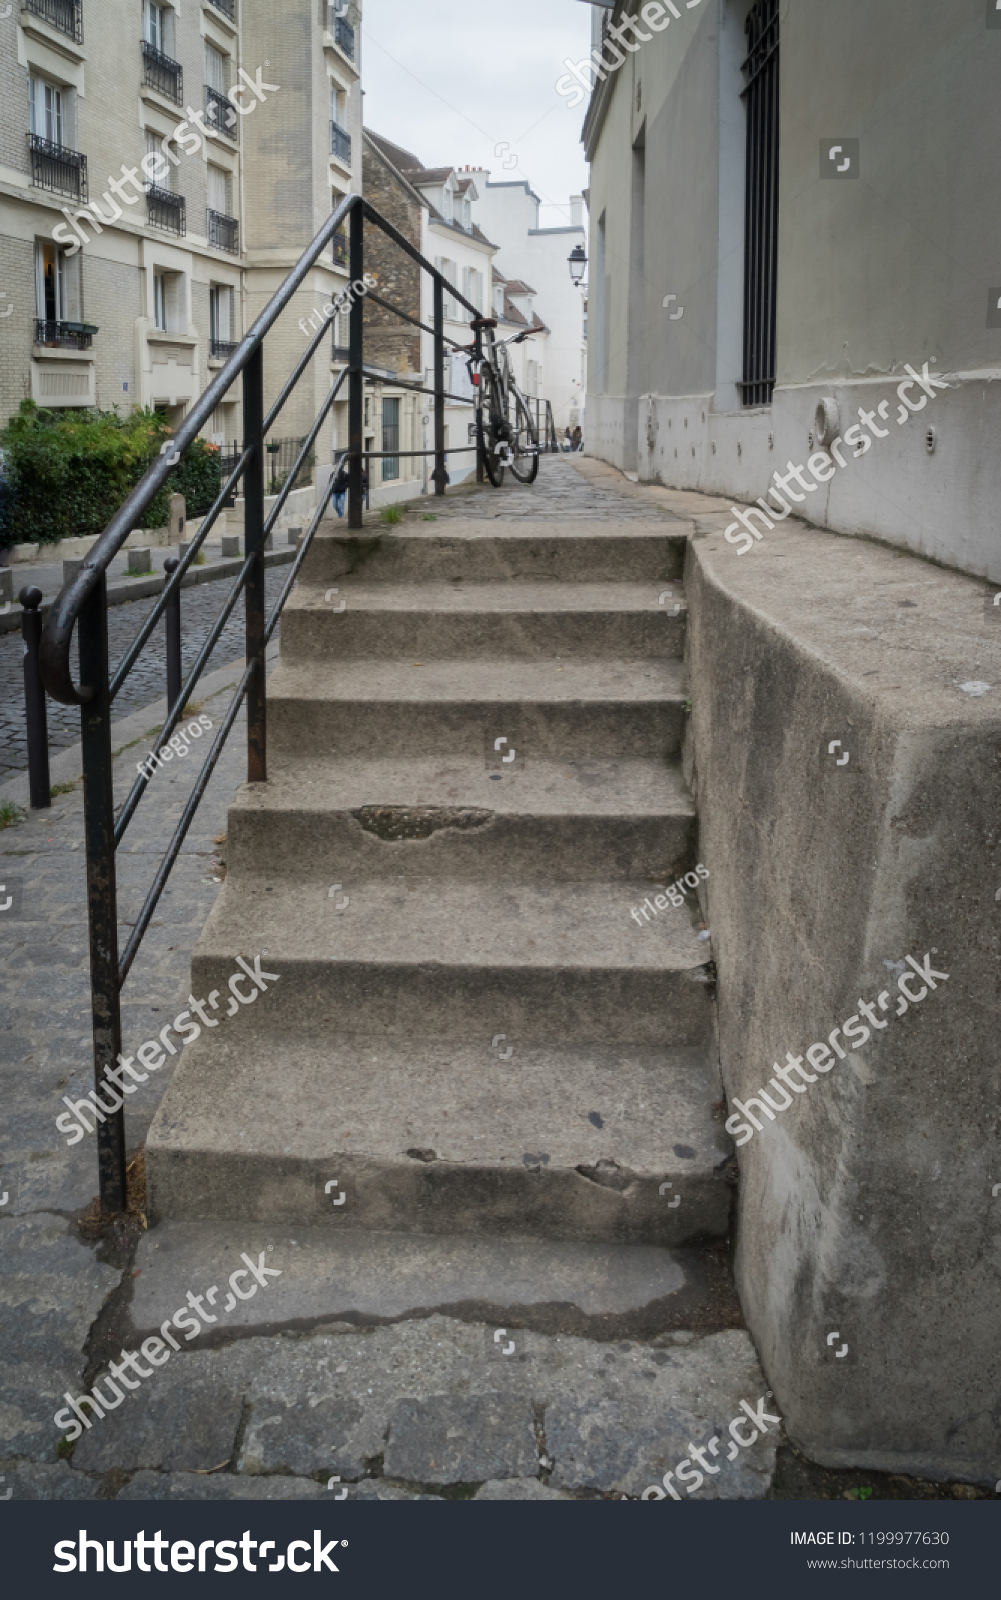 Paris, France - 10 07 2018: Montmartre. A staircase behind the S #1199977630